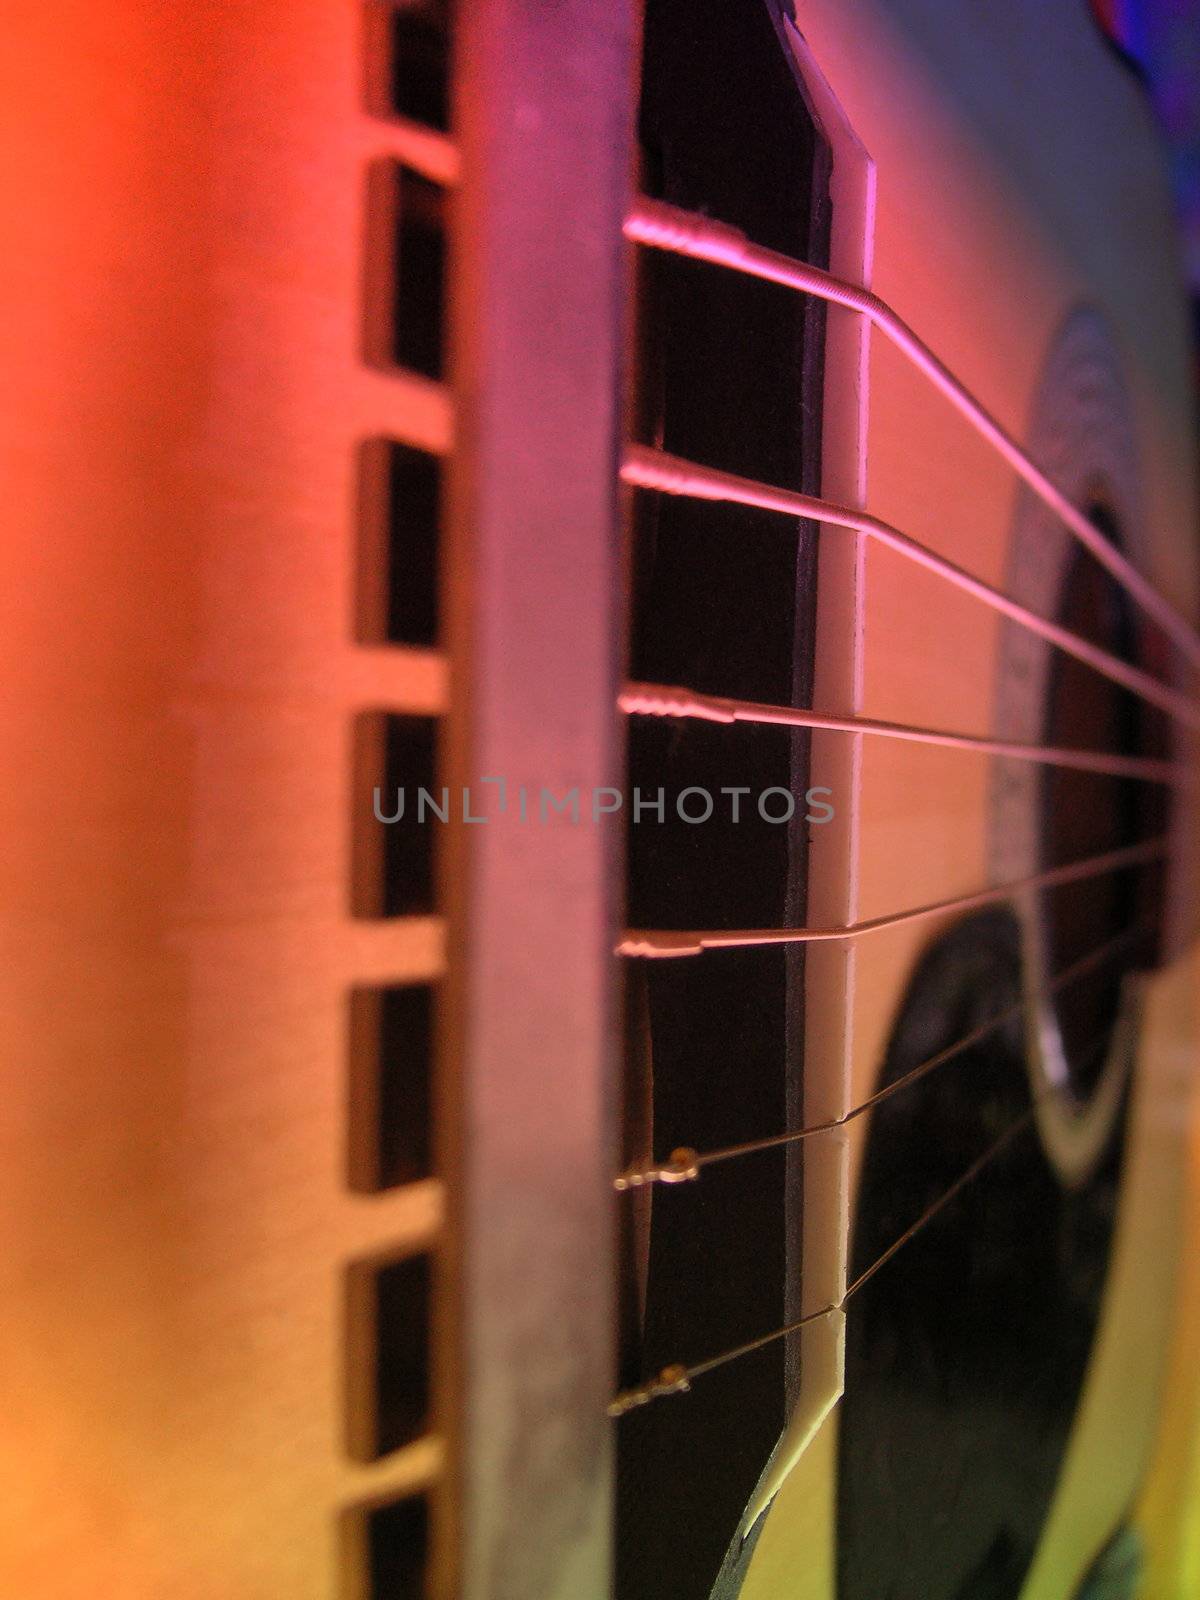 abstract image of the strings and bridge of a guitar